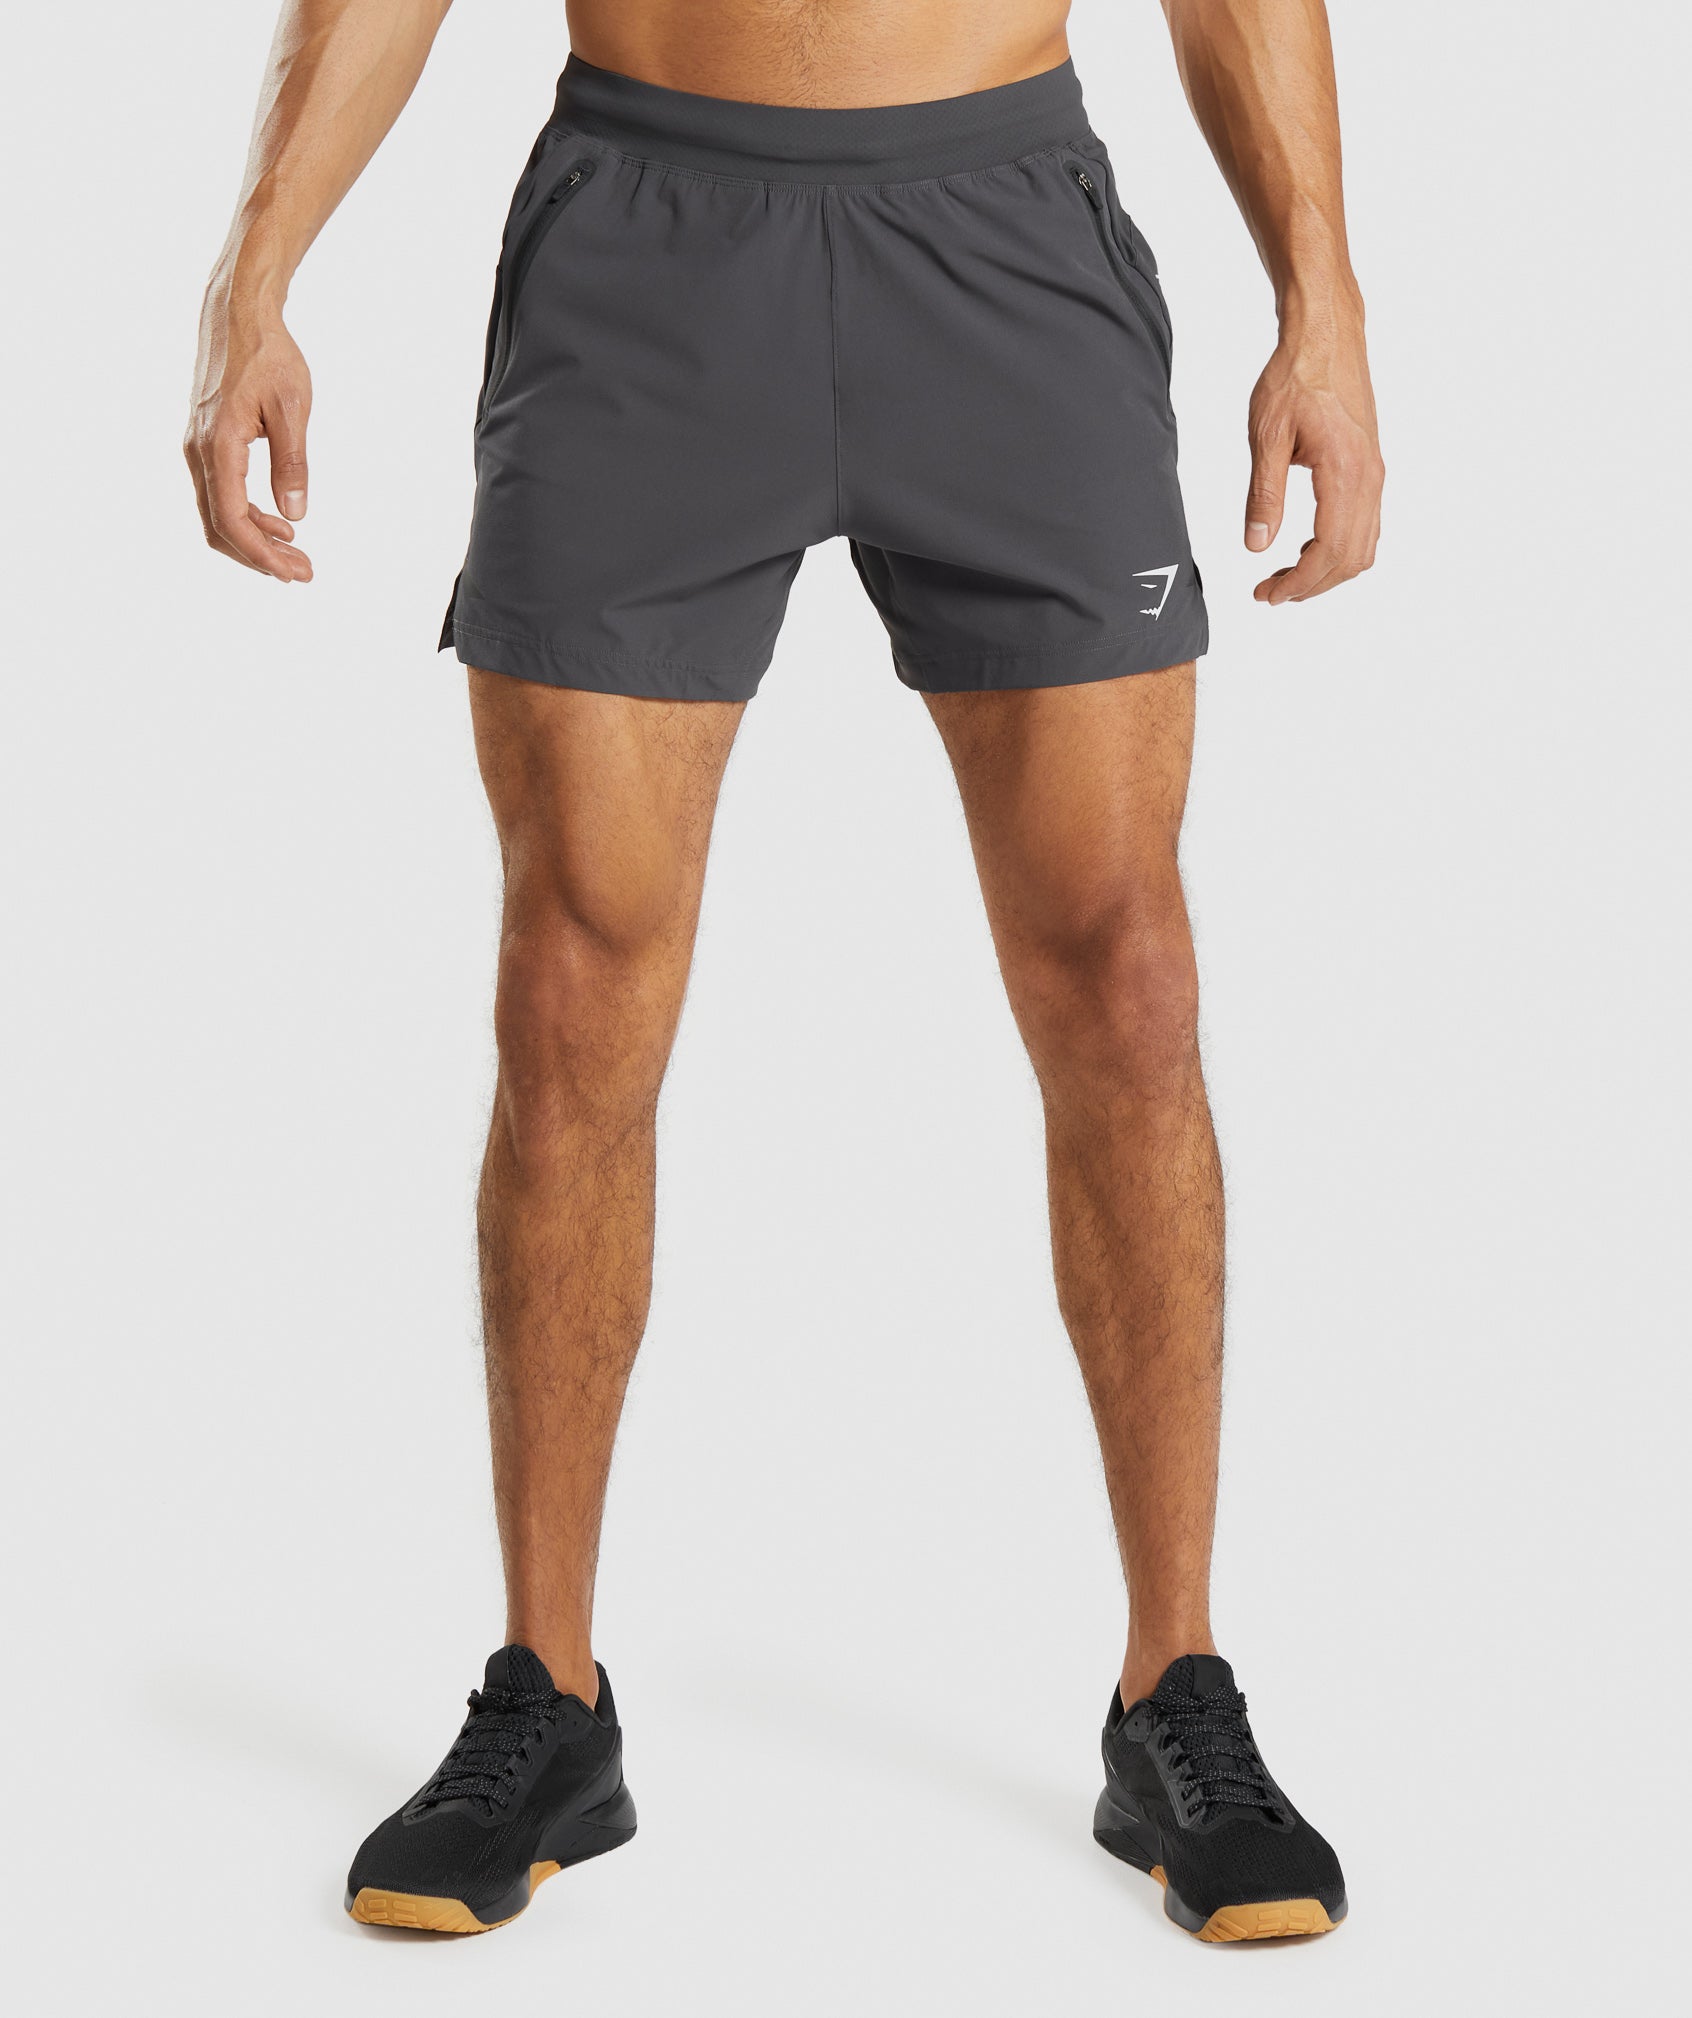 Apex 5" Perform Shorts in Onyx Grey - view 1